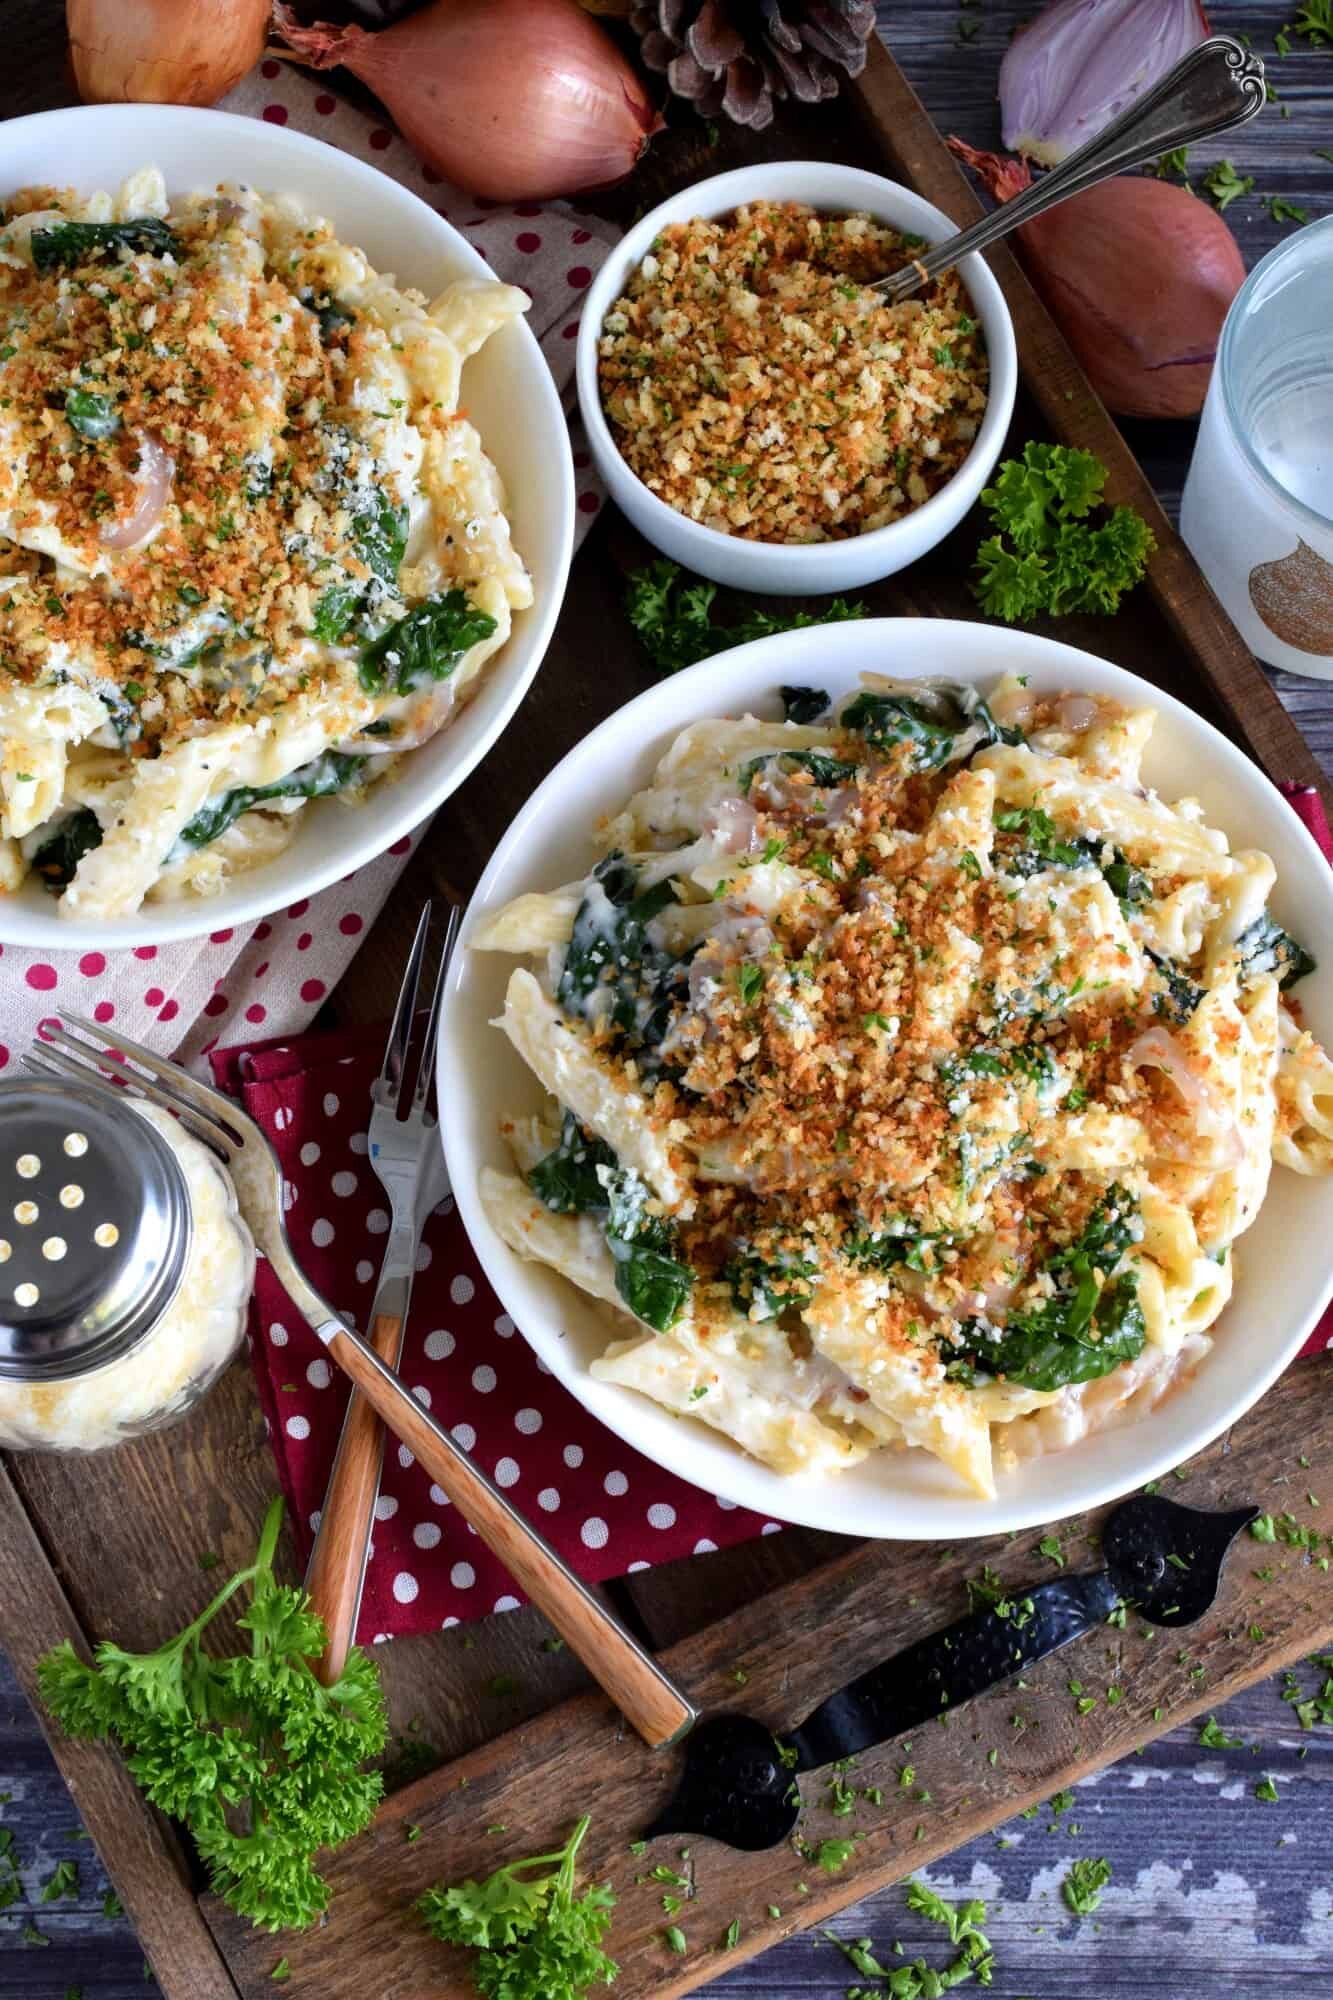 Creamy Pasta with Shallots and Swiss Chard